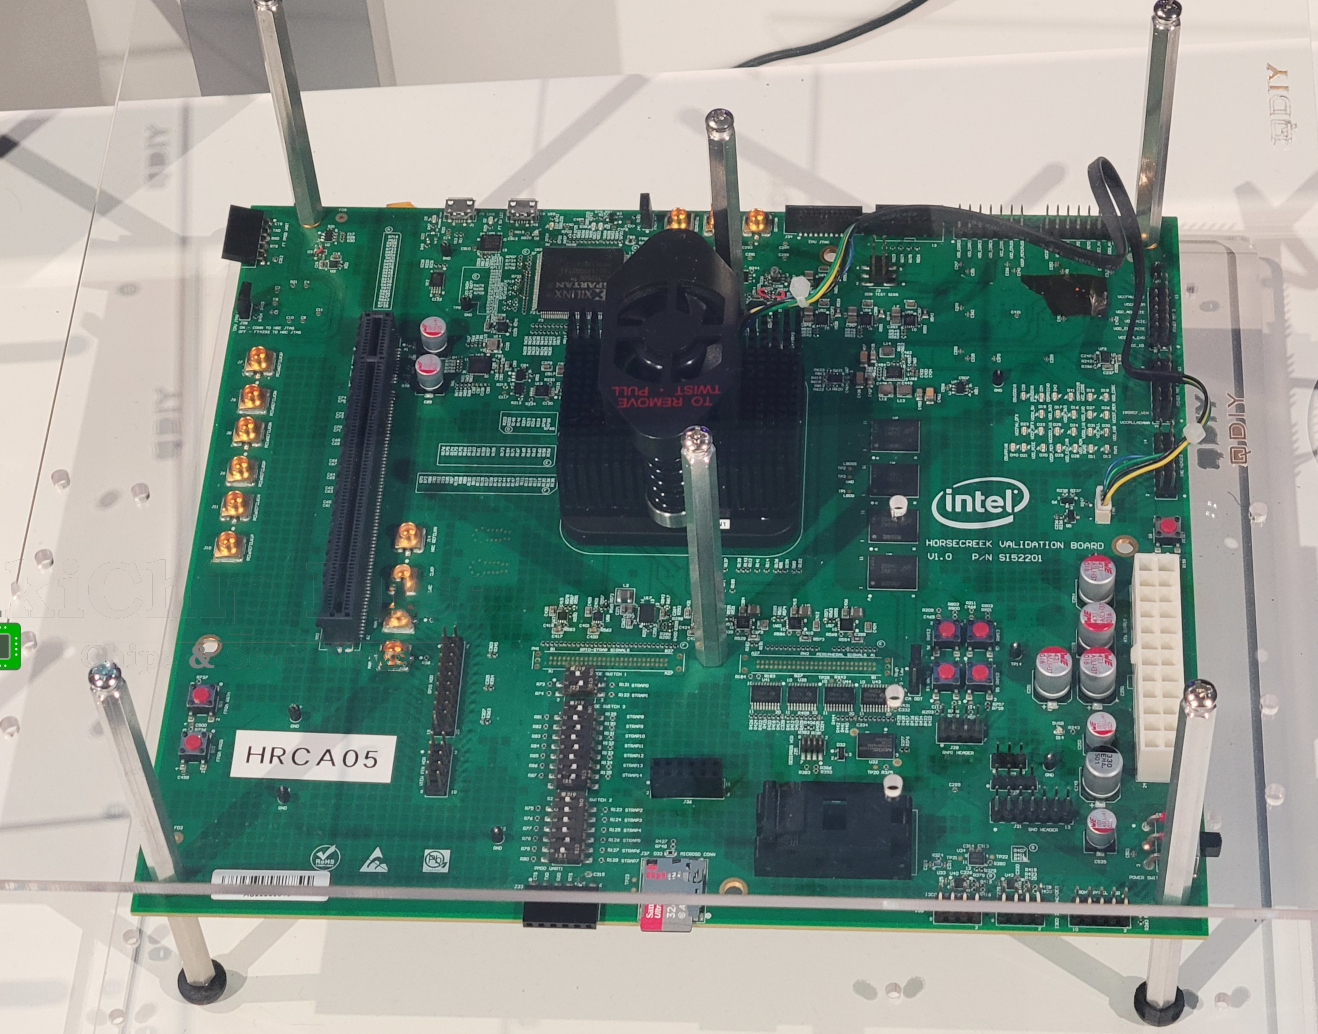 Intel demos “Horse Creek” developer board with SiFive RISC-V CPU, DDR5 RAM and PCIe 5.0 slot